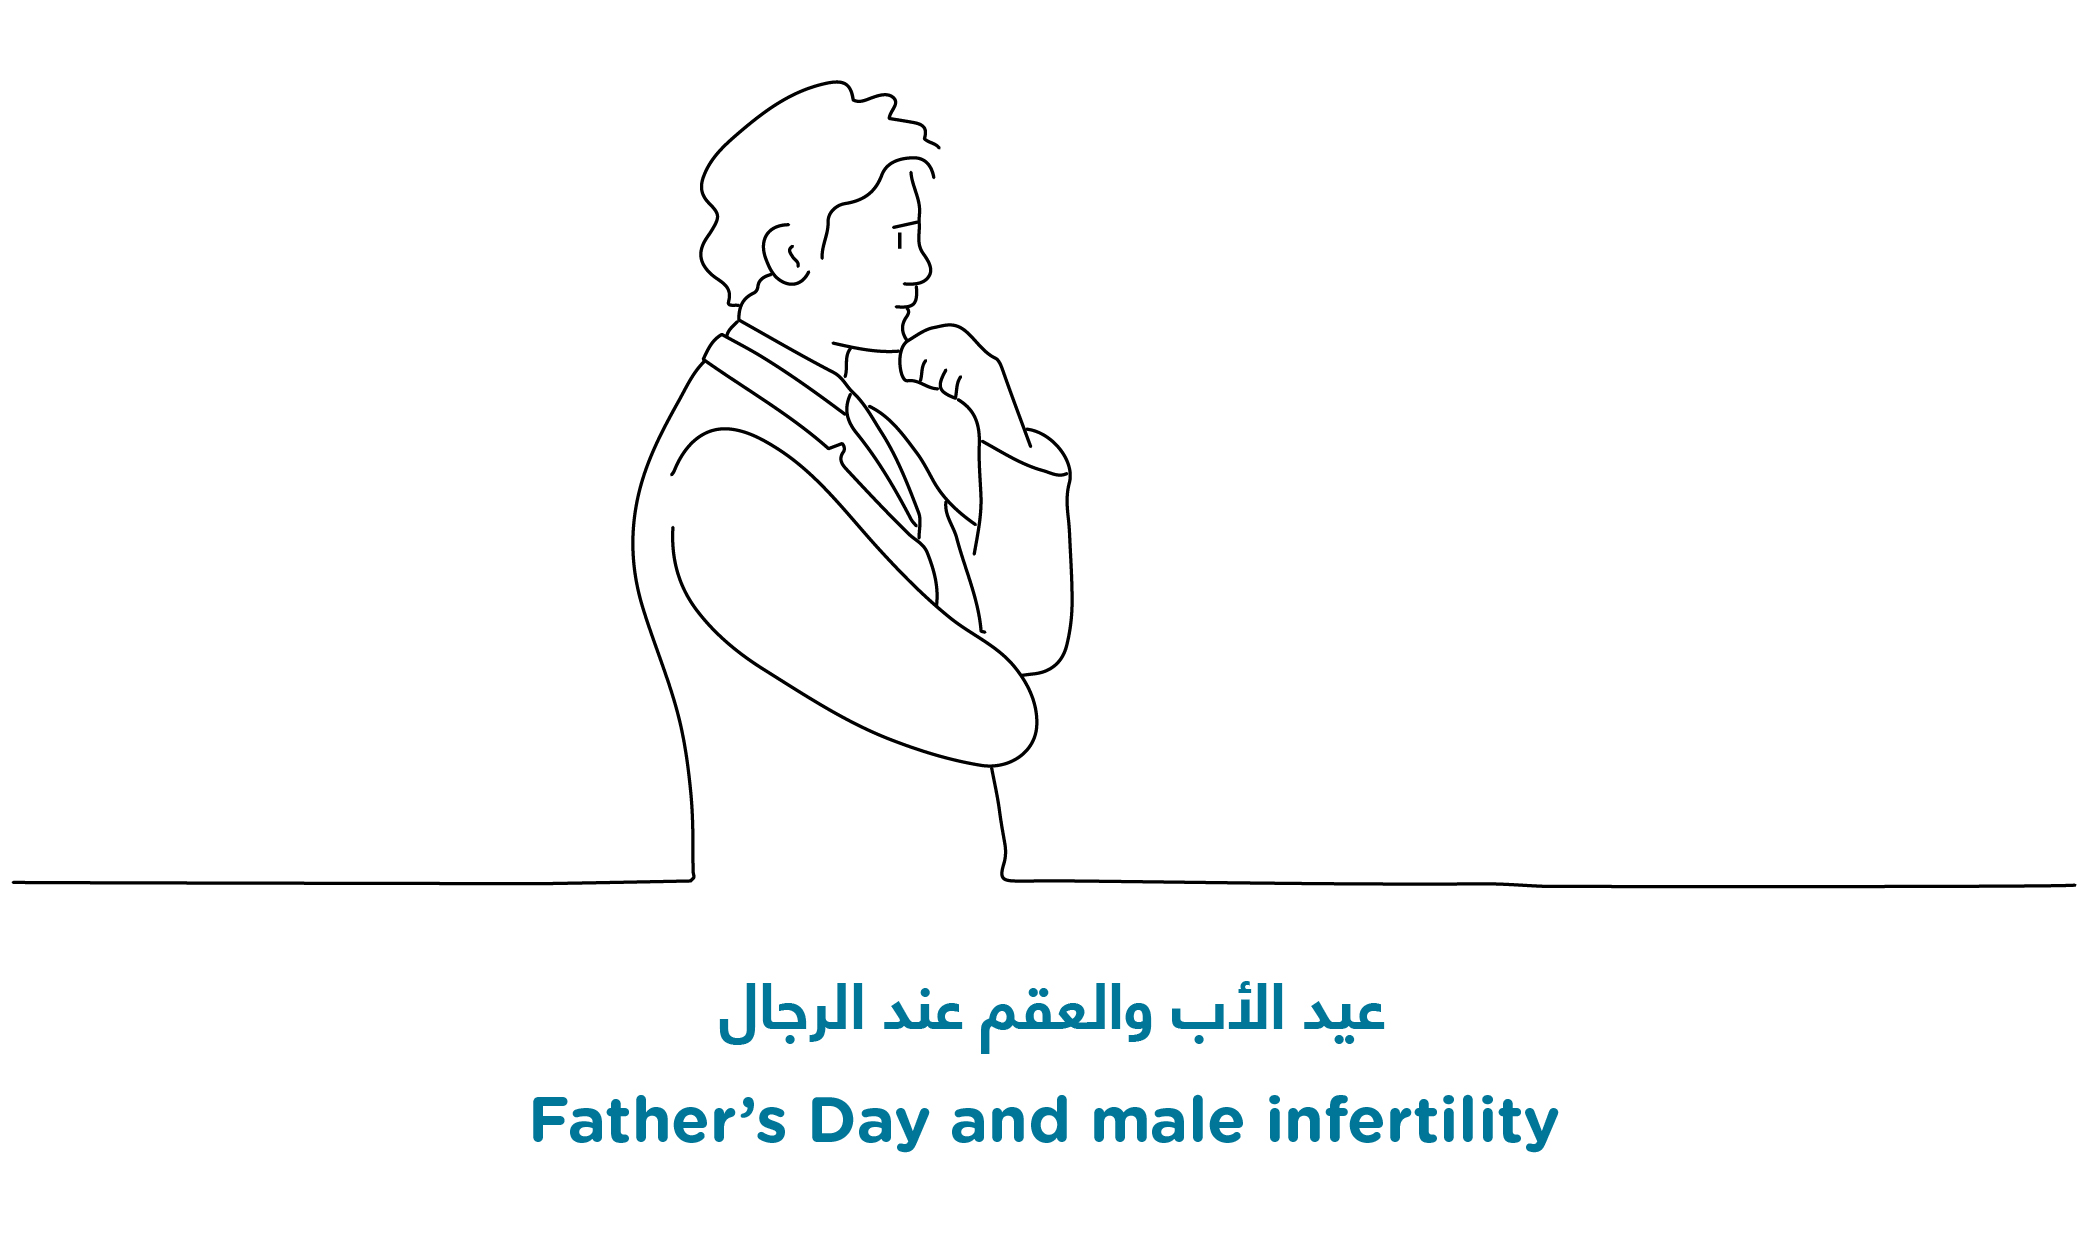 Father’s Day and male infertility